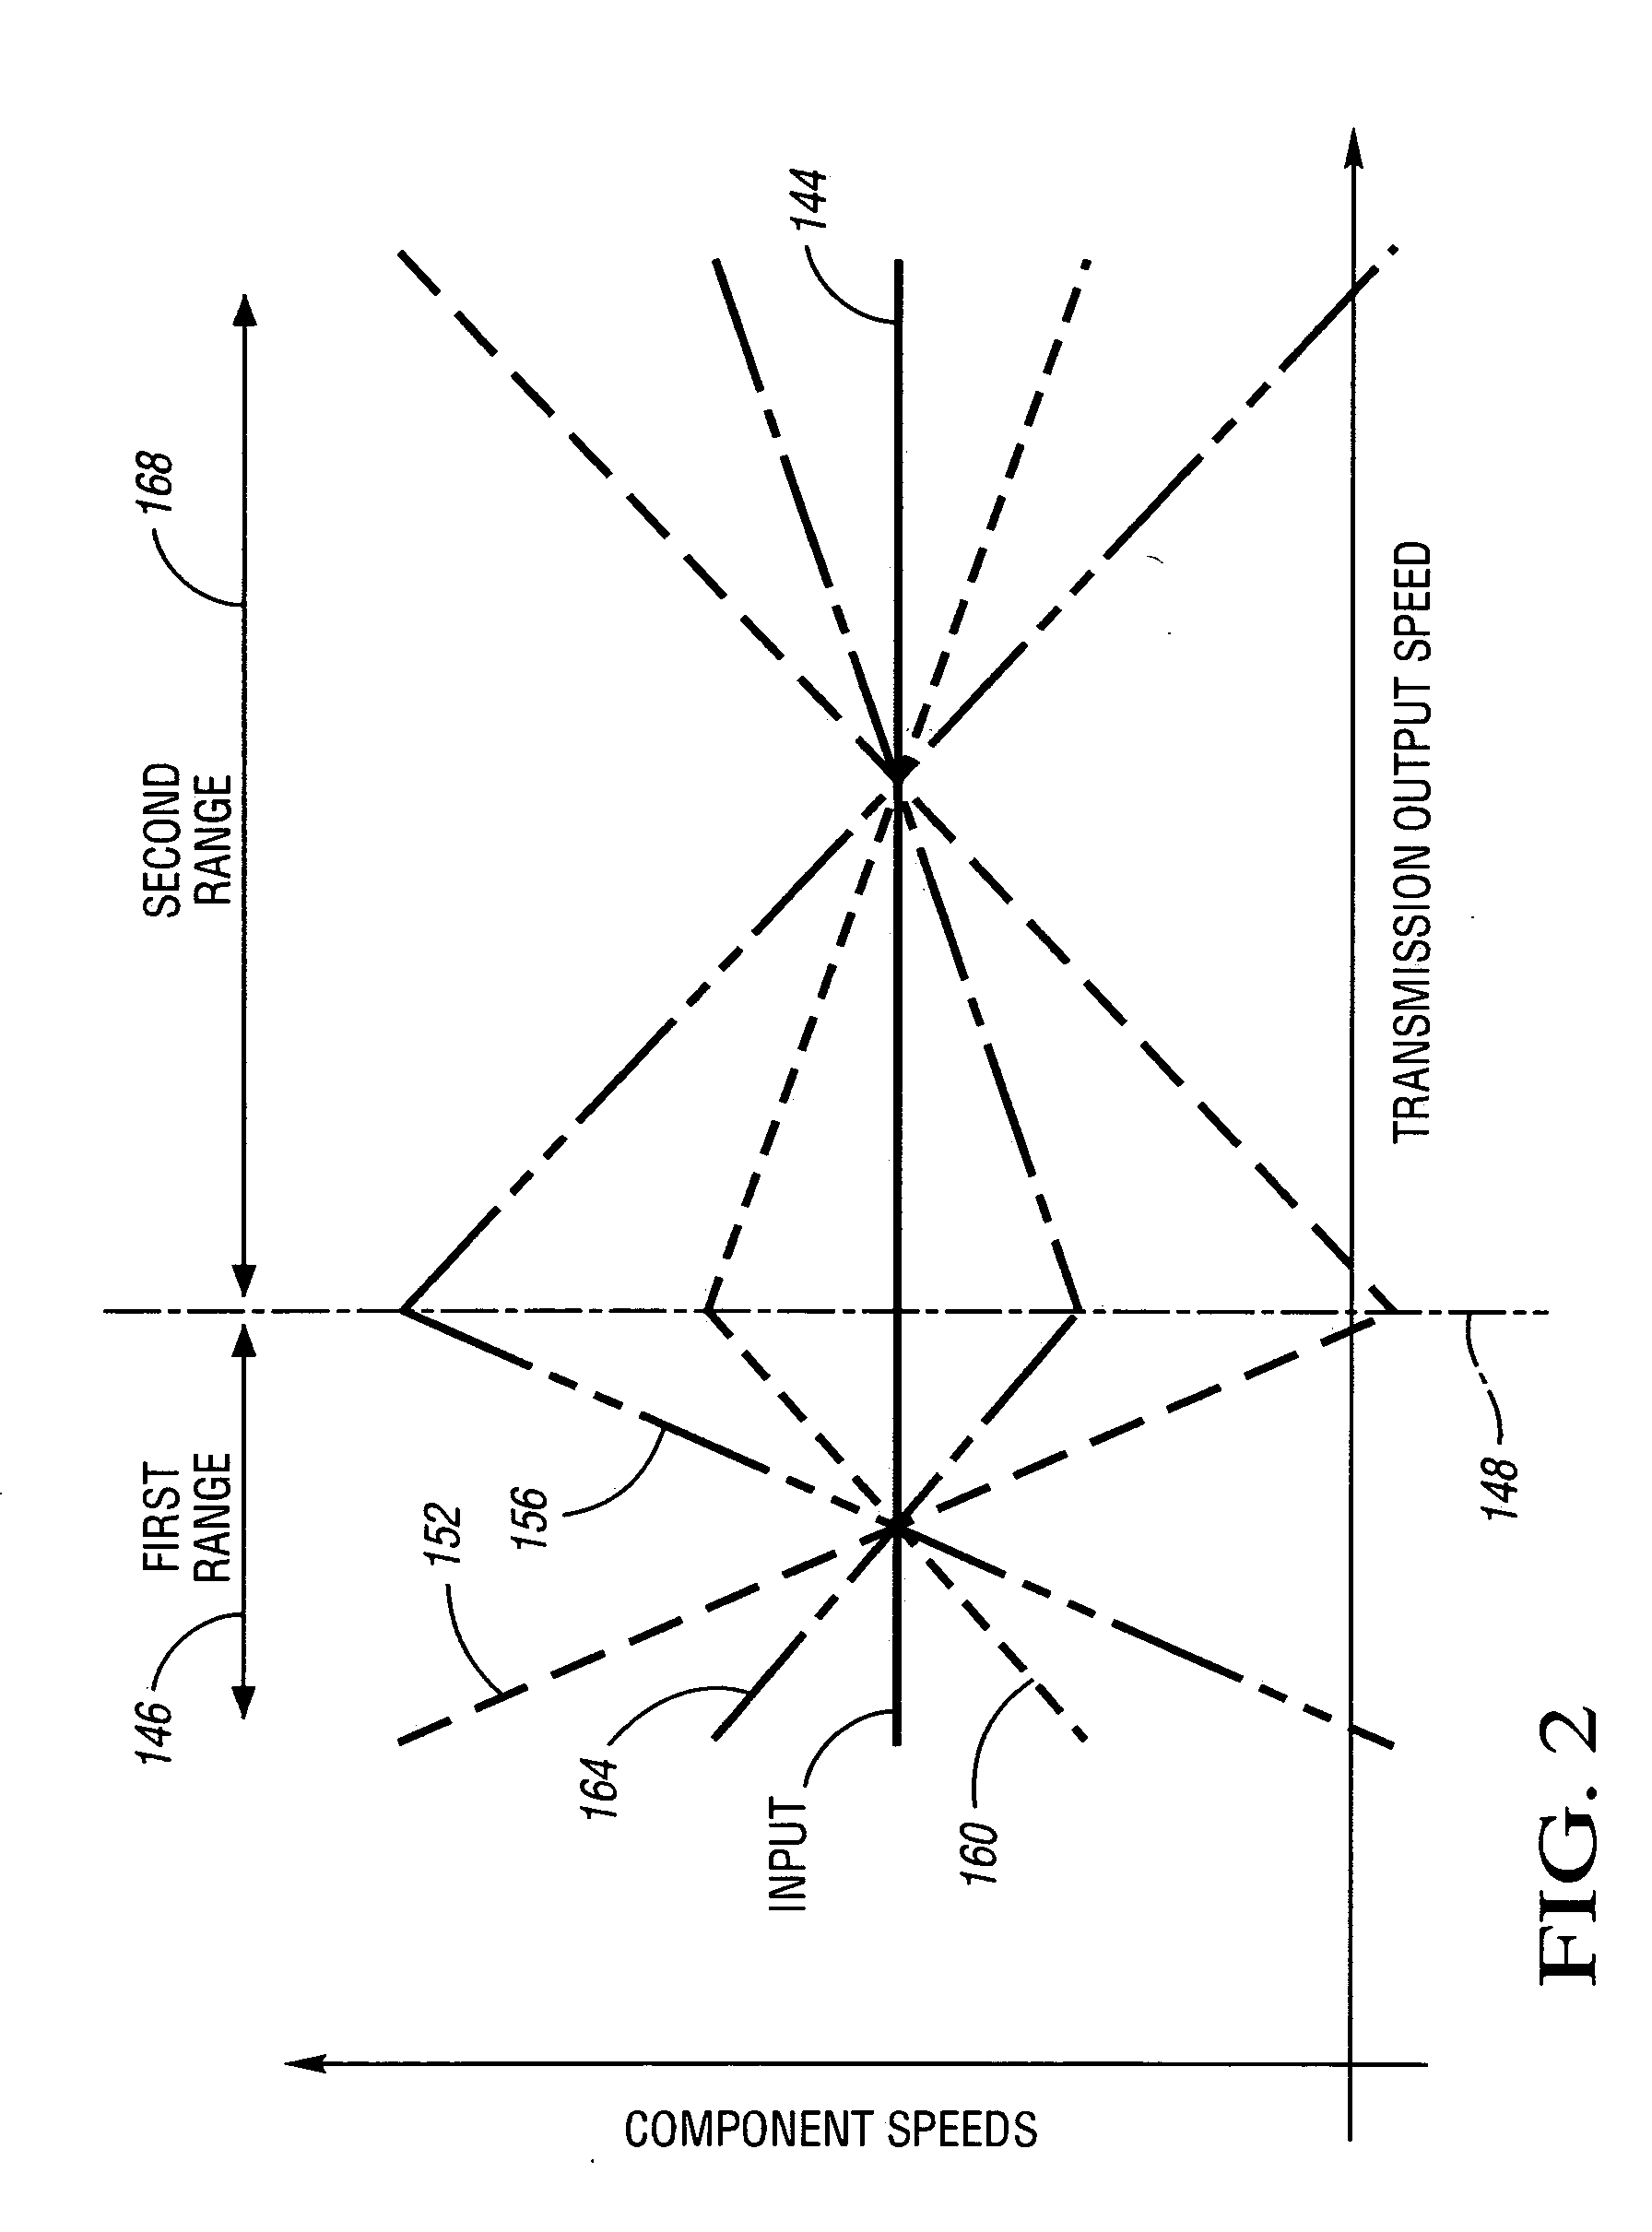 Compound differential dual power path transmission